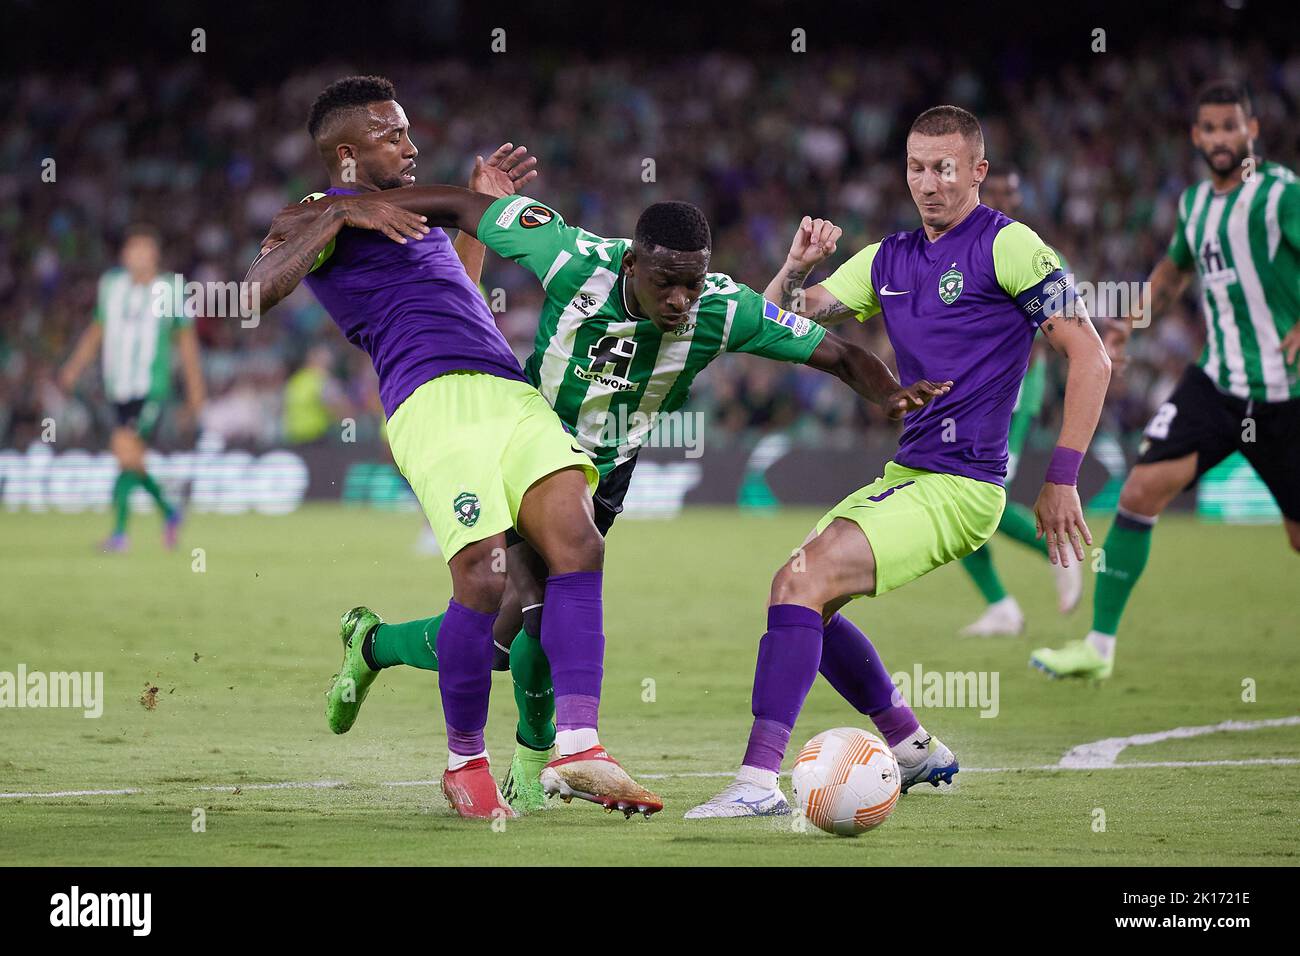 Seville, Spain. 1st Sep, 2022. Luiz Henrique (11) of Real Betis and Cicinho (4) of Ludogorets seen during the UEFA Europa League match between Real Betis and Ludogorets at Estadio Benito Villamarin in Seville. (Photo Credit: Gonzales Photo/Alamy Live News Stock Photo